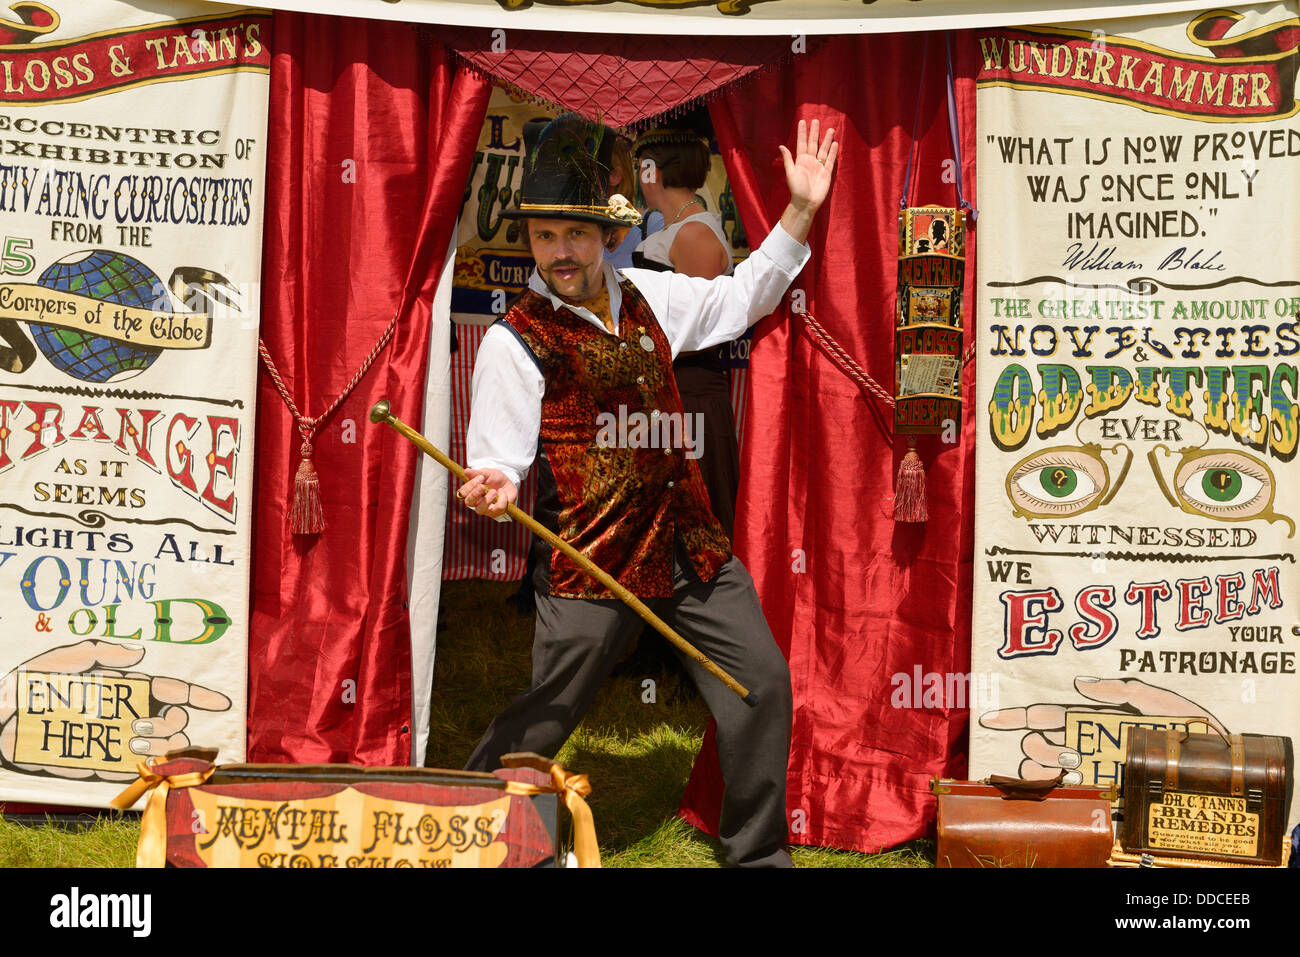 Sideshow illusionniste et hustler à Coldwater Canadiana Heritage Museum steampunk festival Ontario Canada Banque D'Images